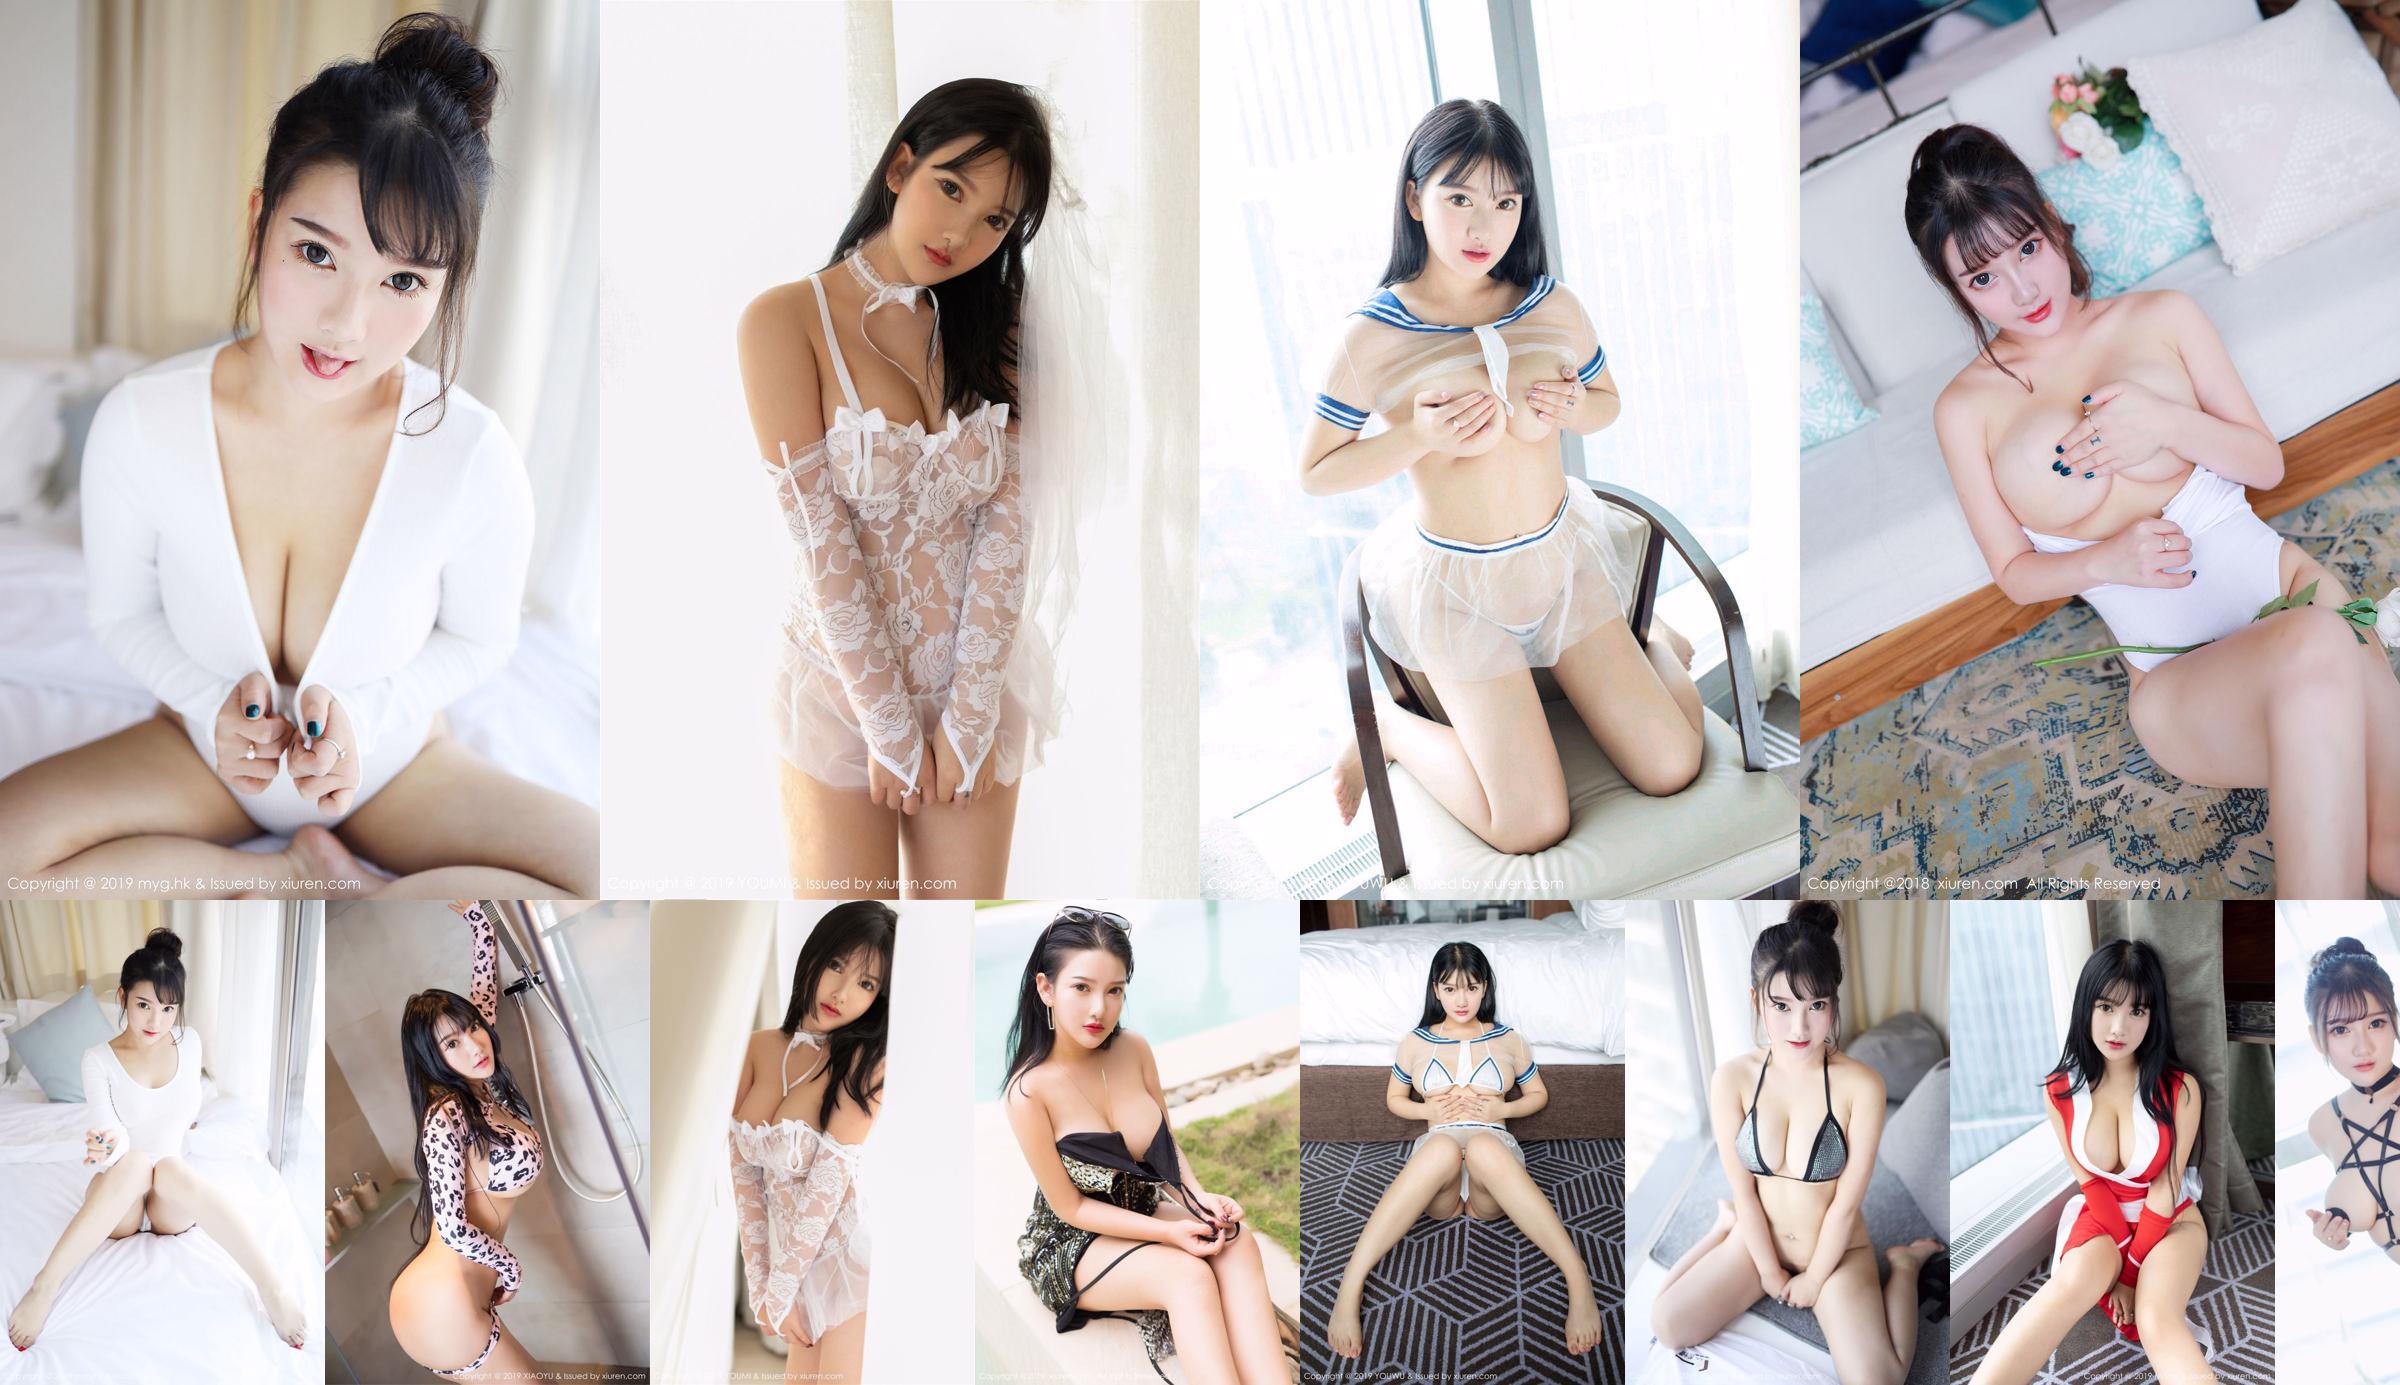 Little Yunai "Little Girl with Big Tits" [花扬HuaYang] Vol.123 No.ebdfef Page 1